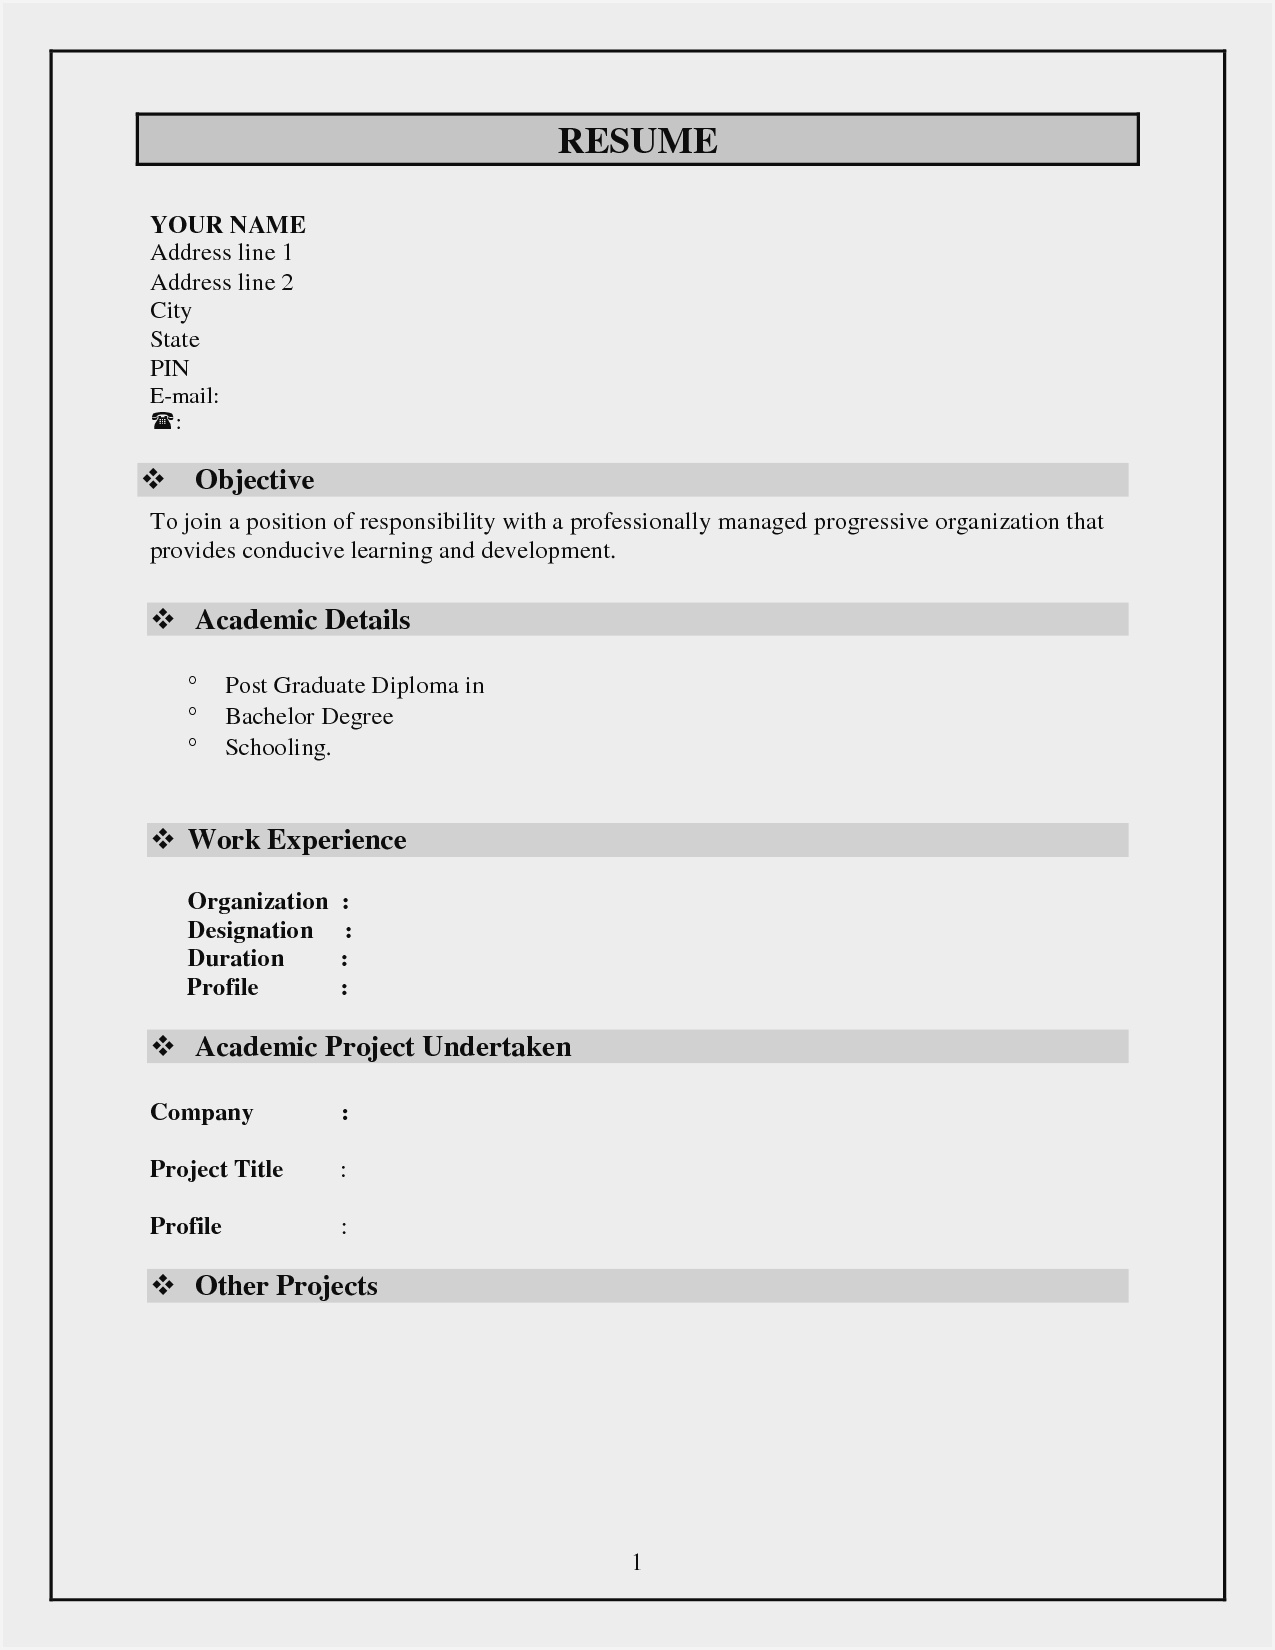 Resume Template Word Download Malaysia – Resume Sample With Job Application Template Word